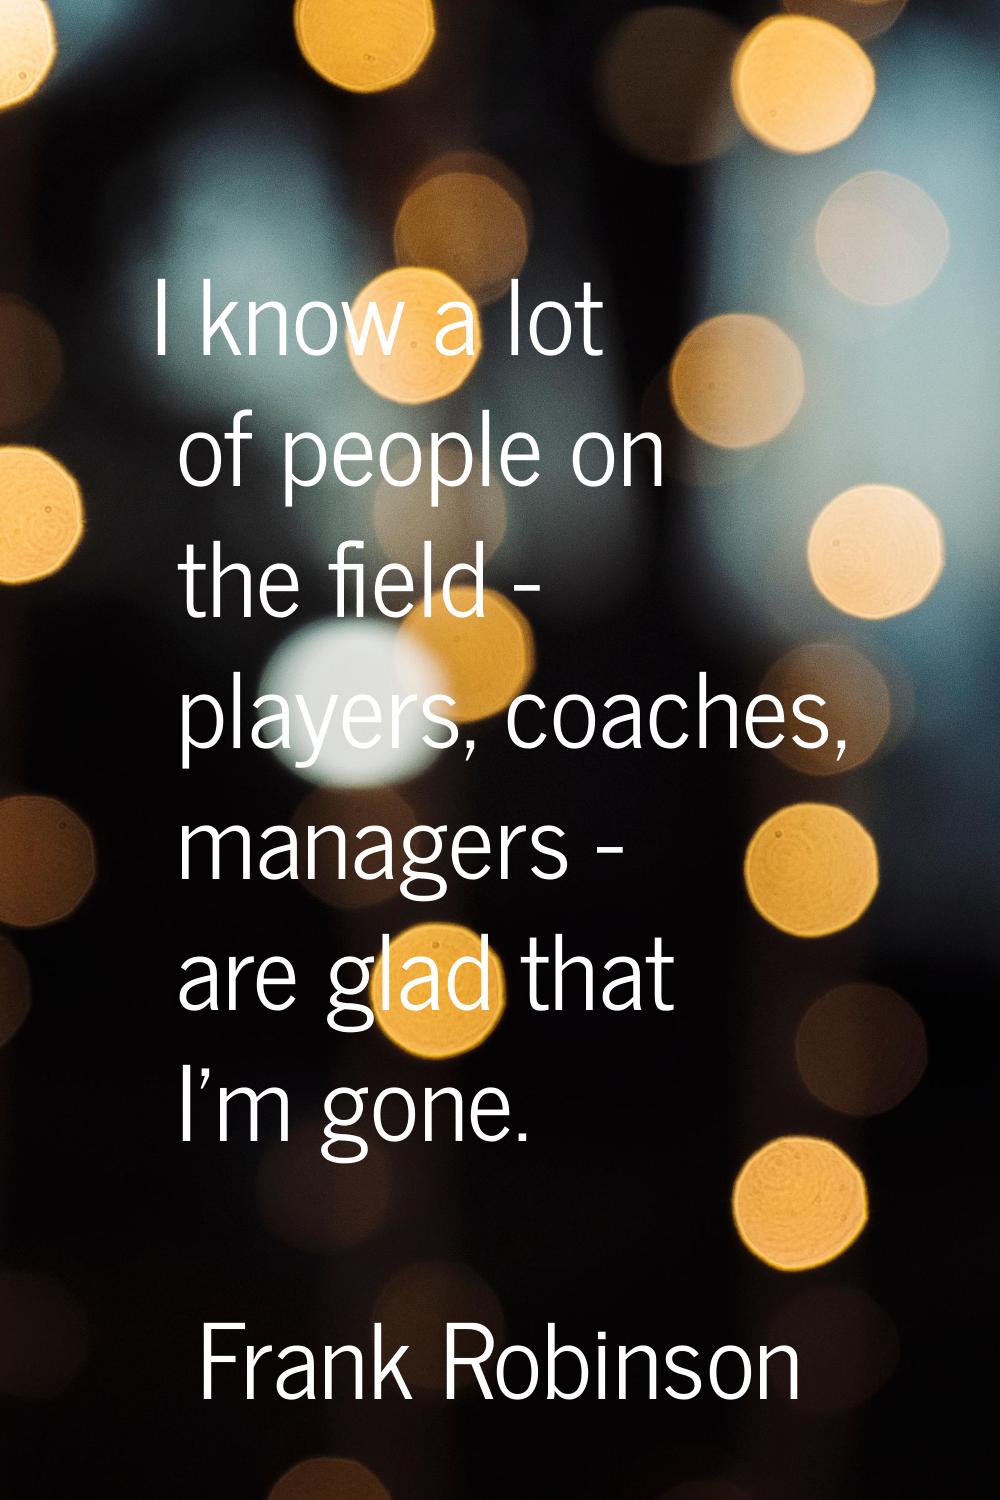 I know a lot of people on the field - players, coaches, managers - are glad that I'm gone.